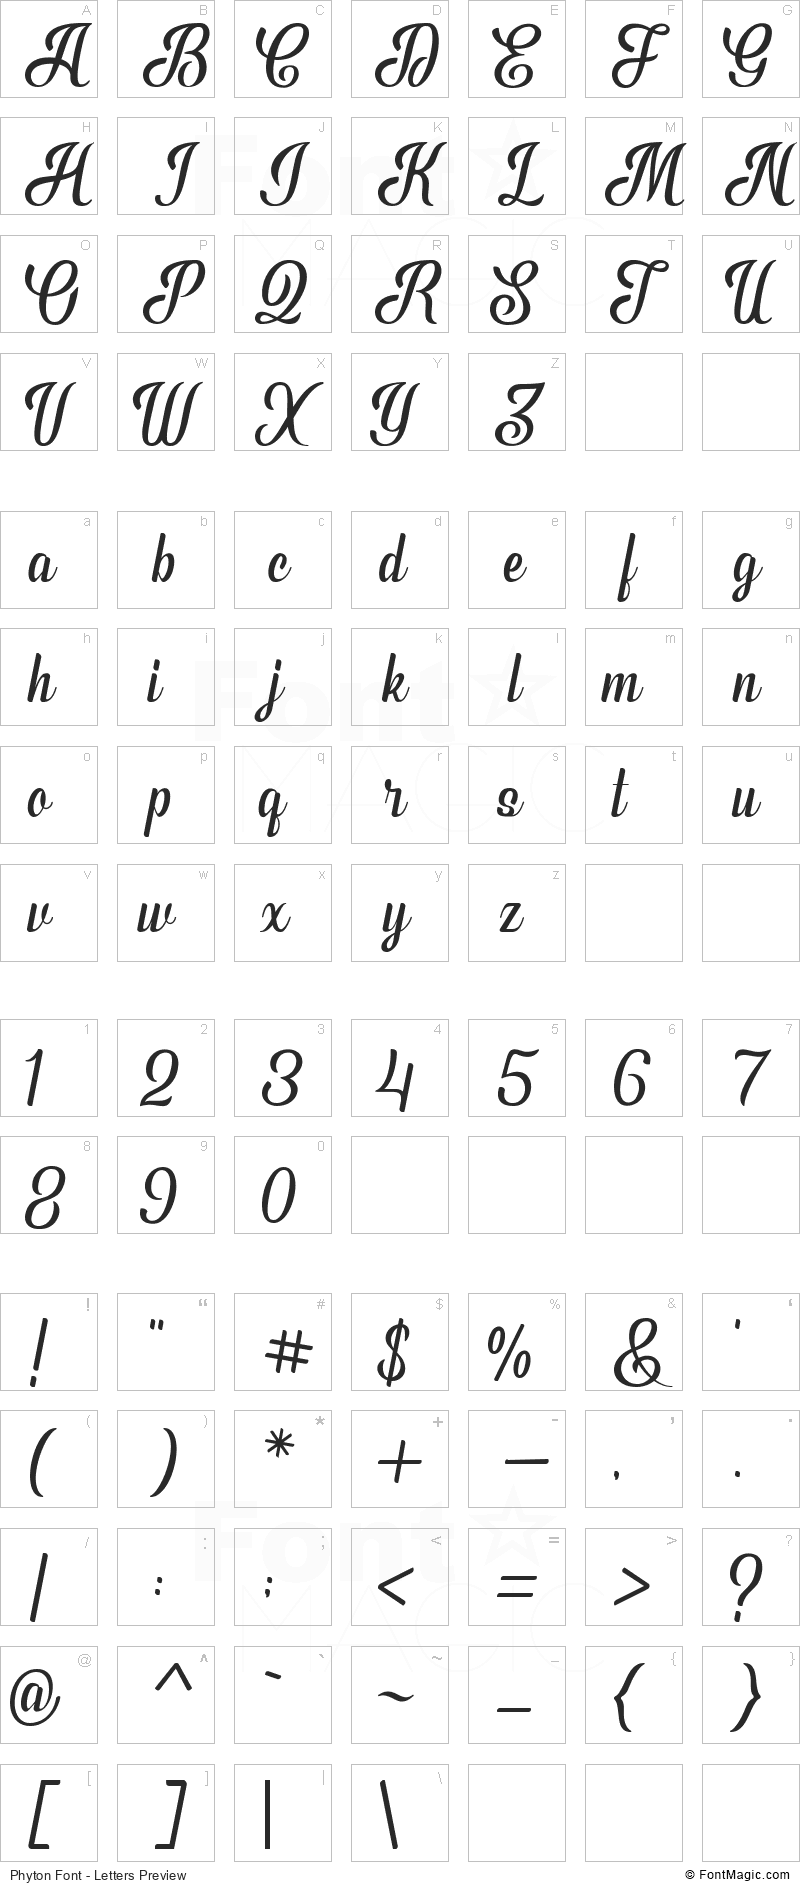 Phyton Font - All Latters Preview Chart